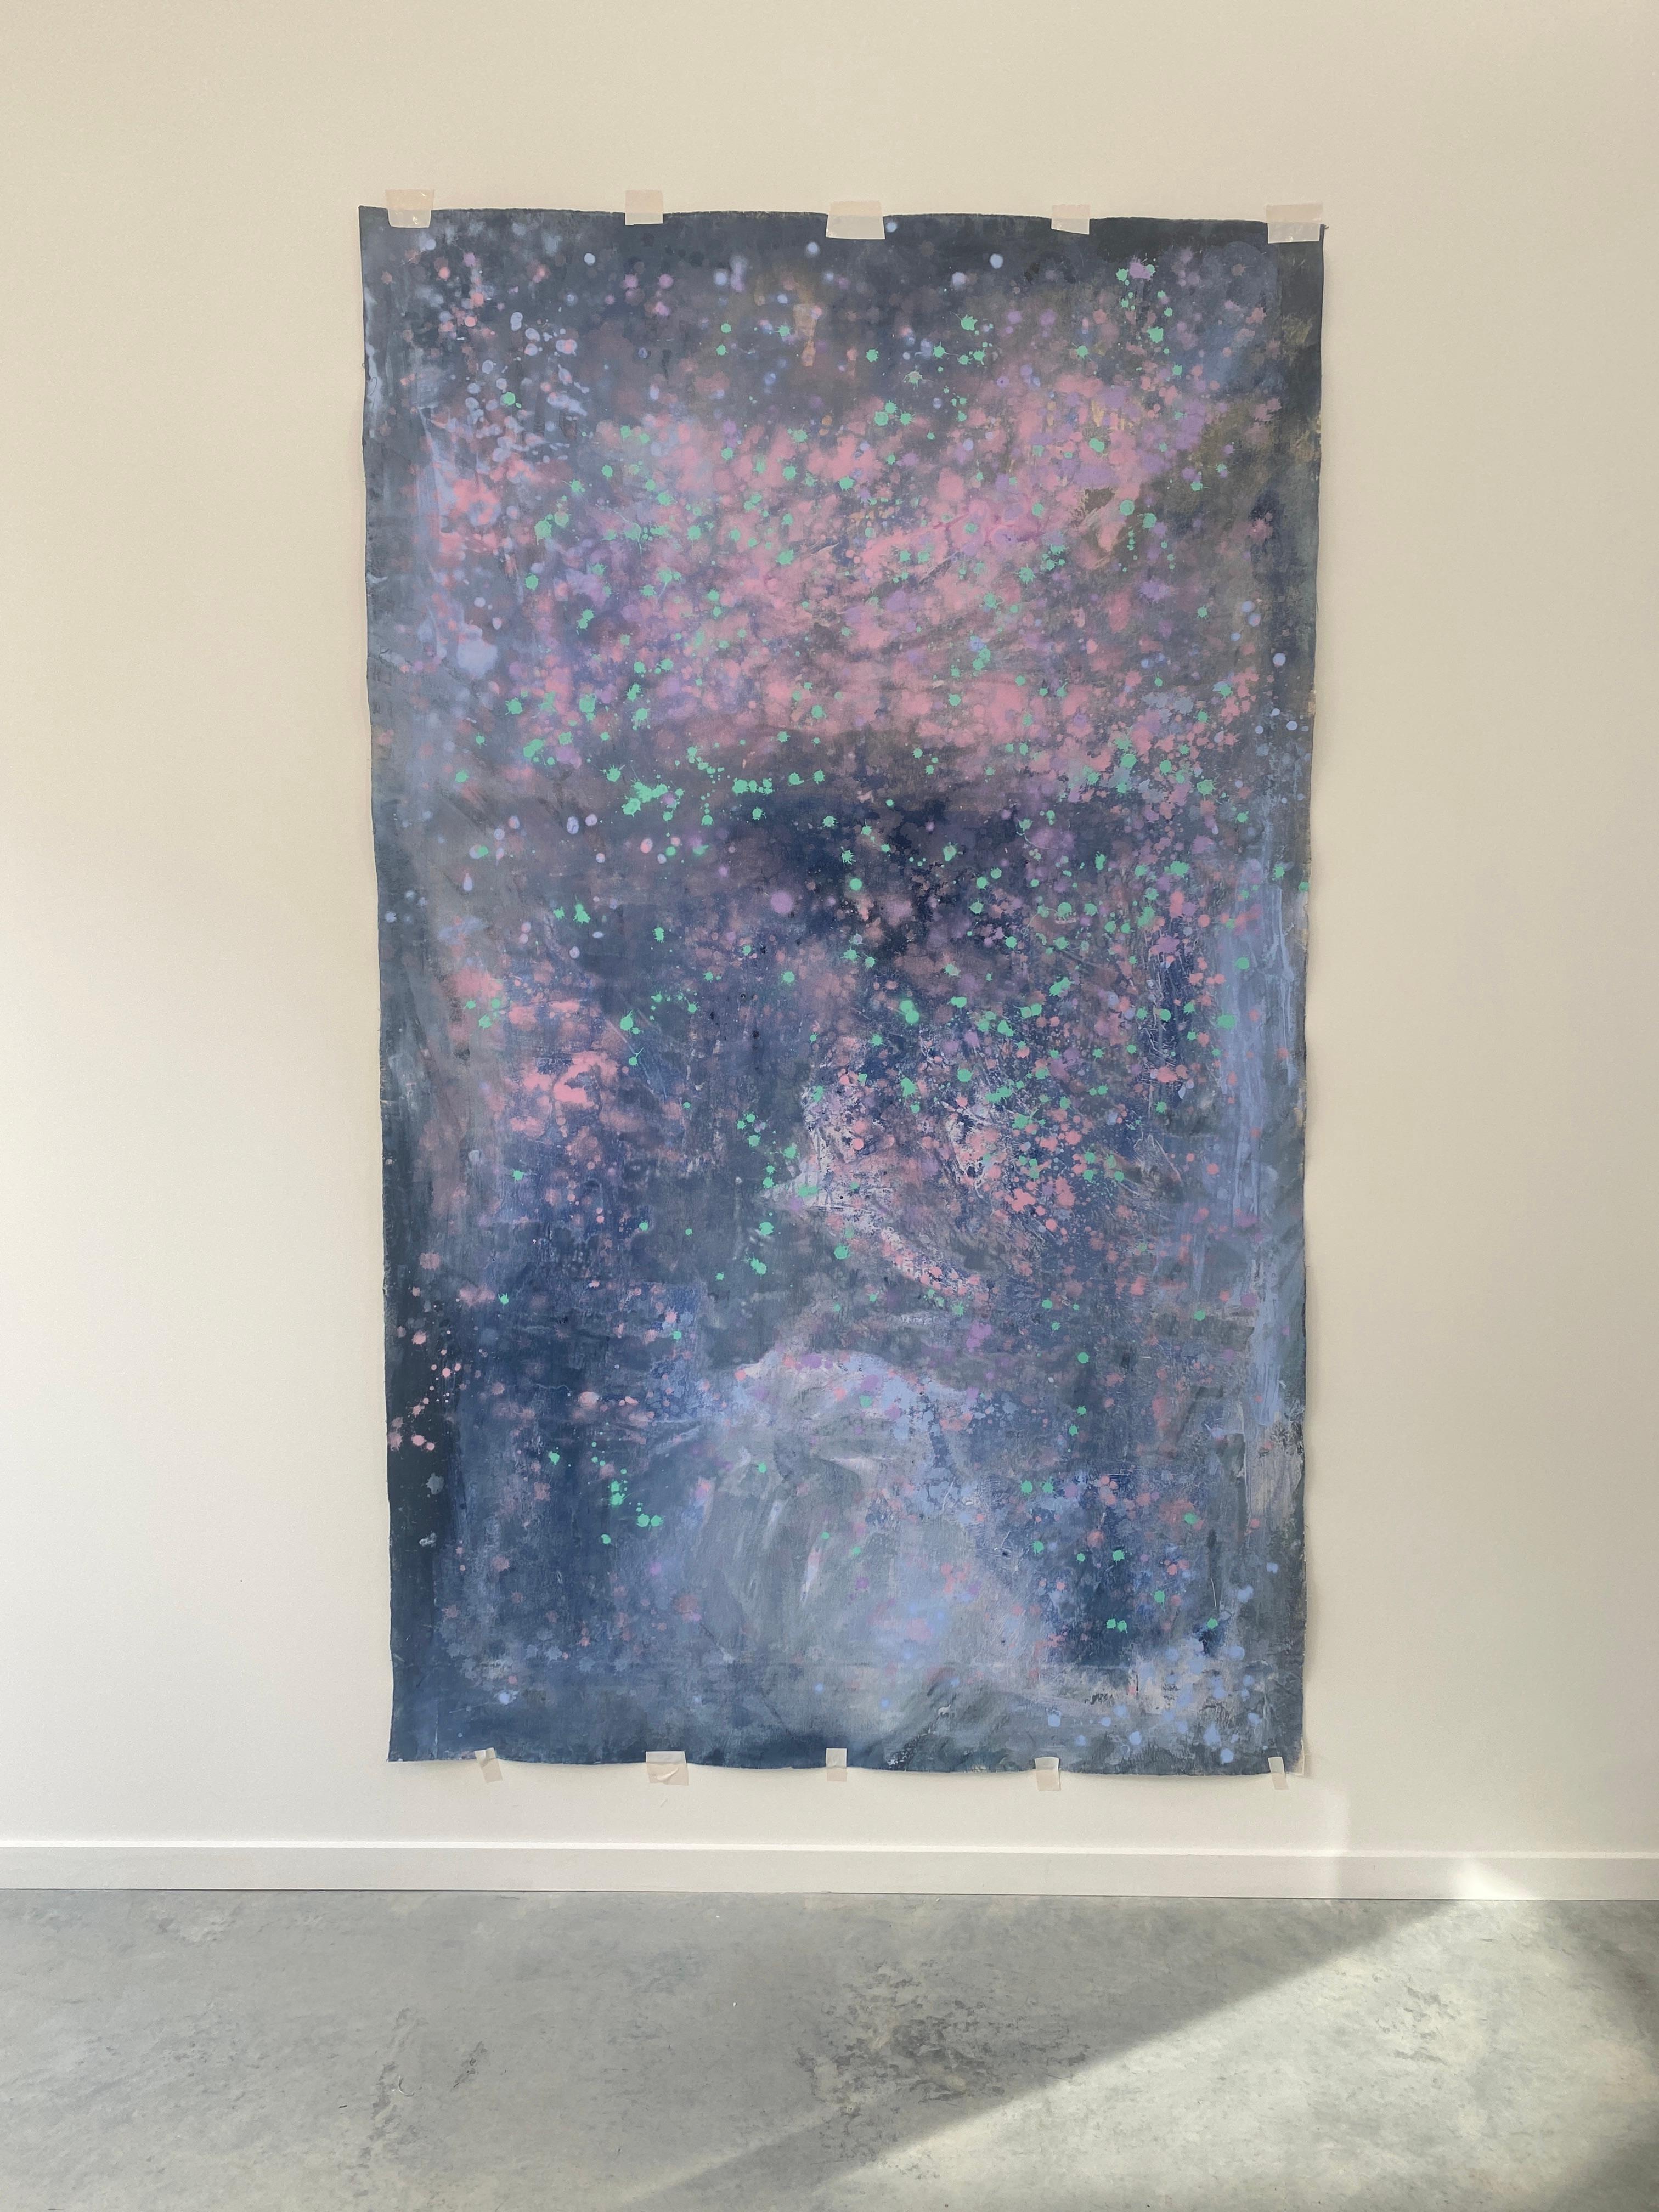 Milky Way large statement art abstract painting on canvas blue grey pink aqua For Sale 2